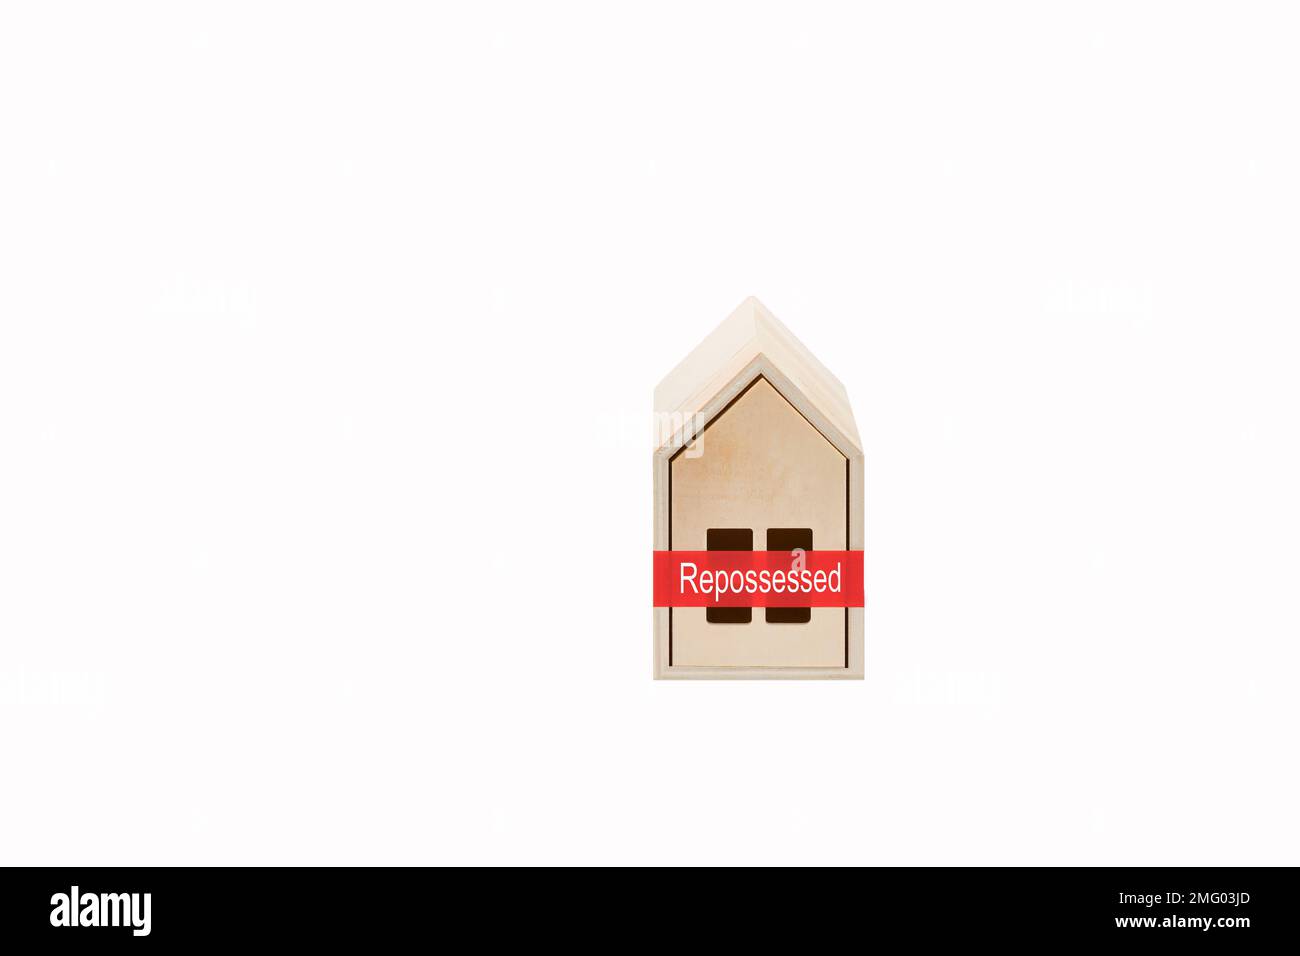 Model house made of wood with red tape and Repossessed message on a plain white background. Rising mortgage interest rates concept. Stock Photo